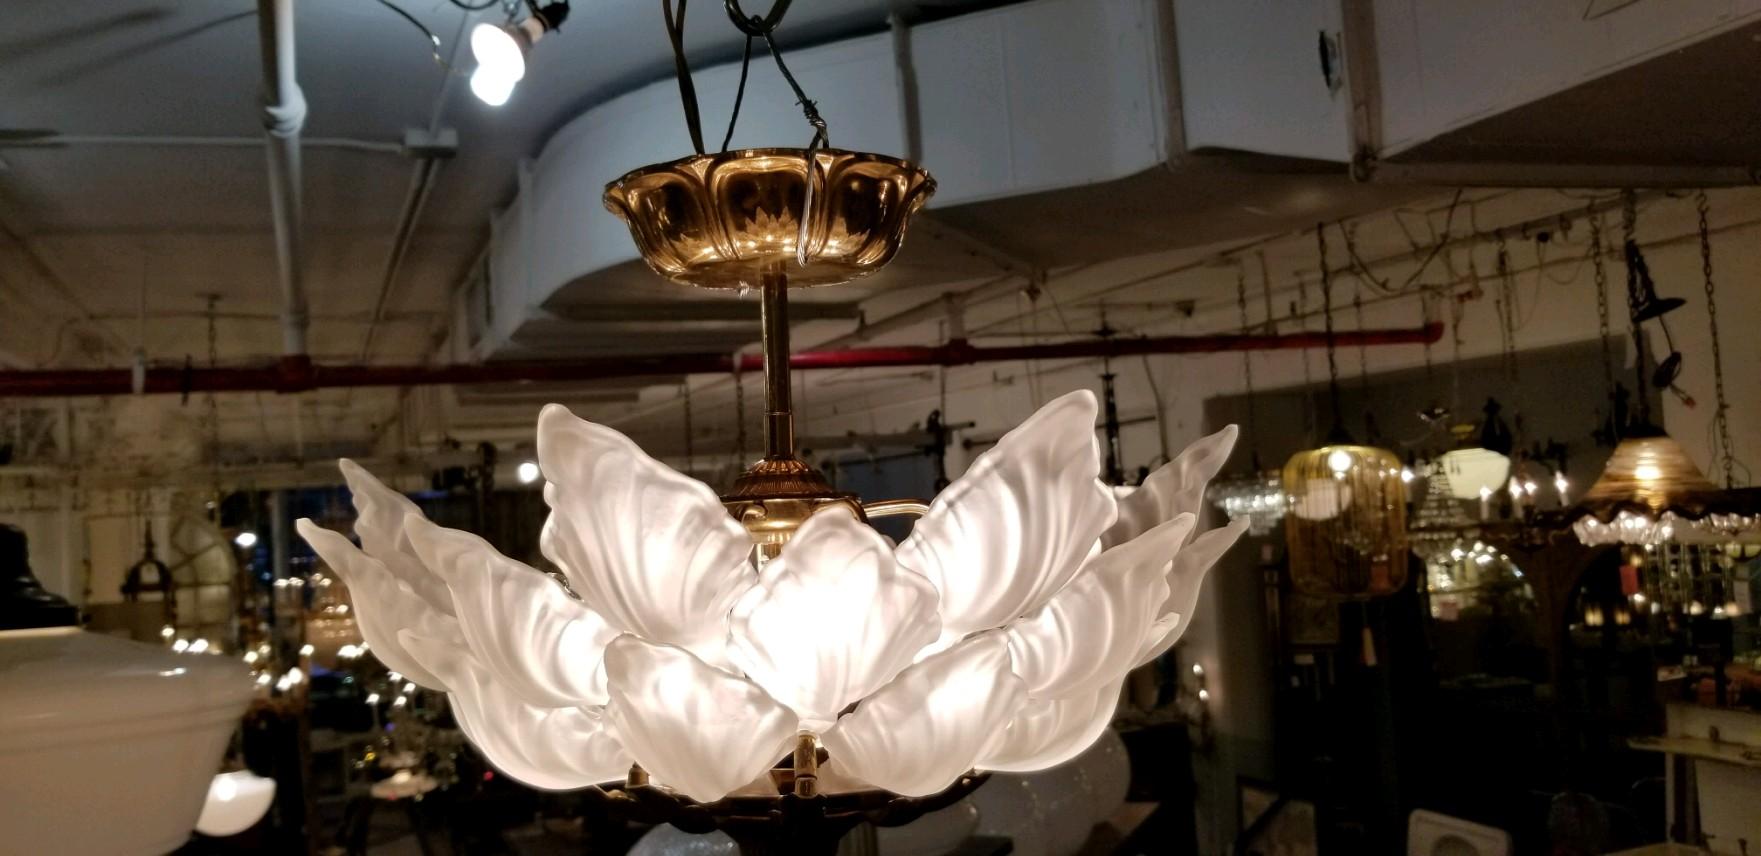 1931 large scale Alba Macbeth Evans white petal ceiling fixture made of cast glass with a heavy brass fitter. Three tiers of leaves with five sockets. Semi flush mount. These lights adorned various suites of the Towers of the NYC Waldorf Astoria